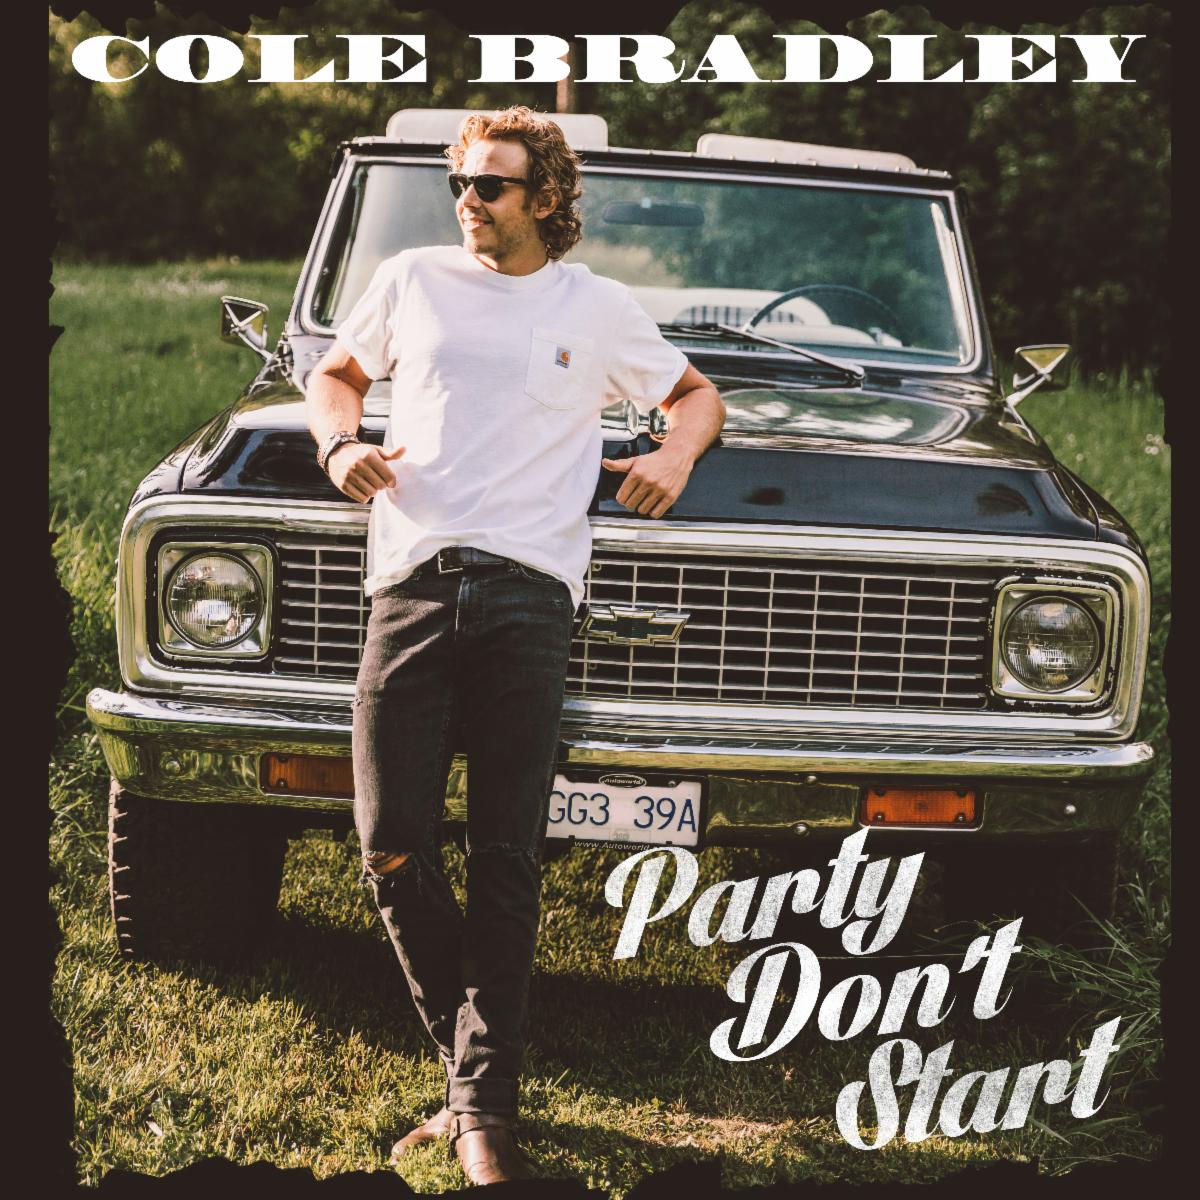 Cole Bradley Sets the Tone for a Good Time In “Party Don’t Start”